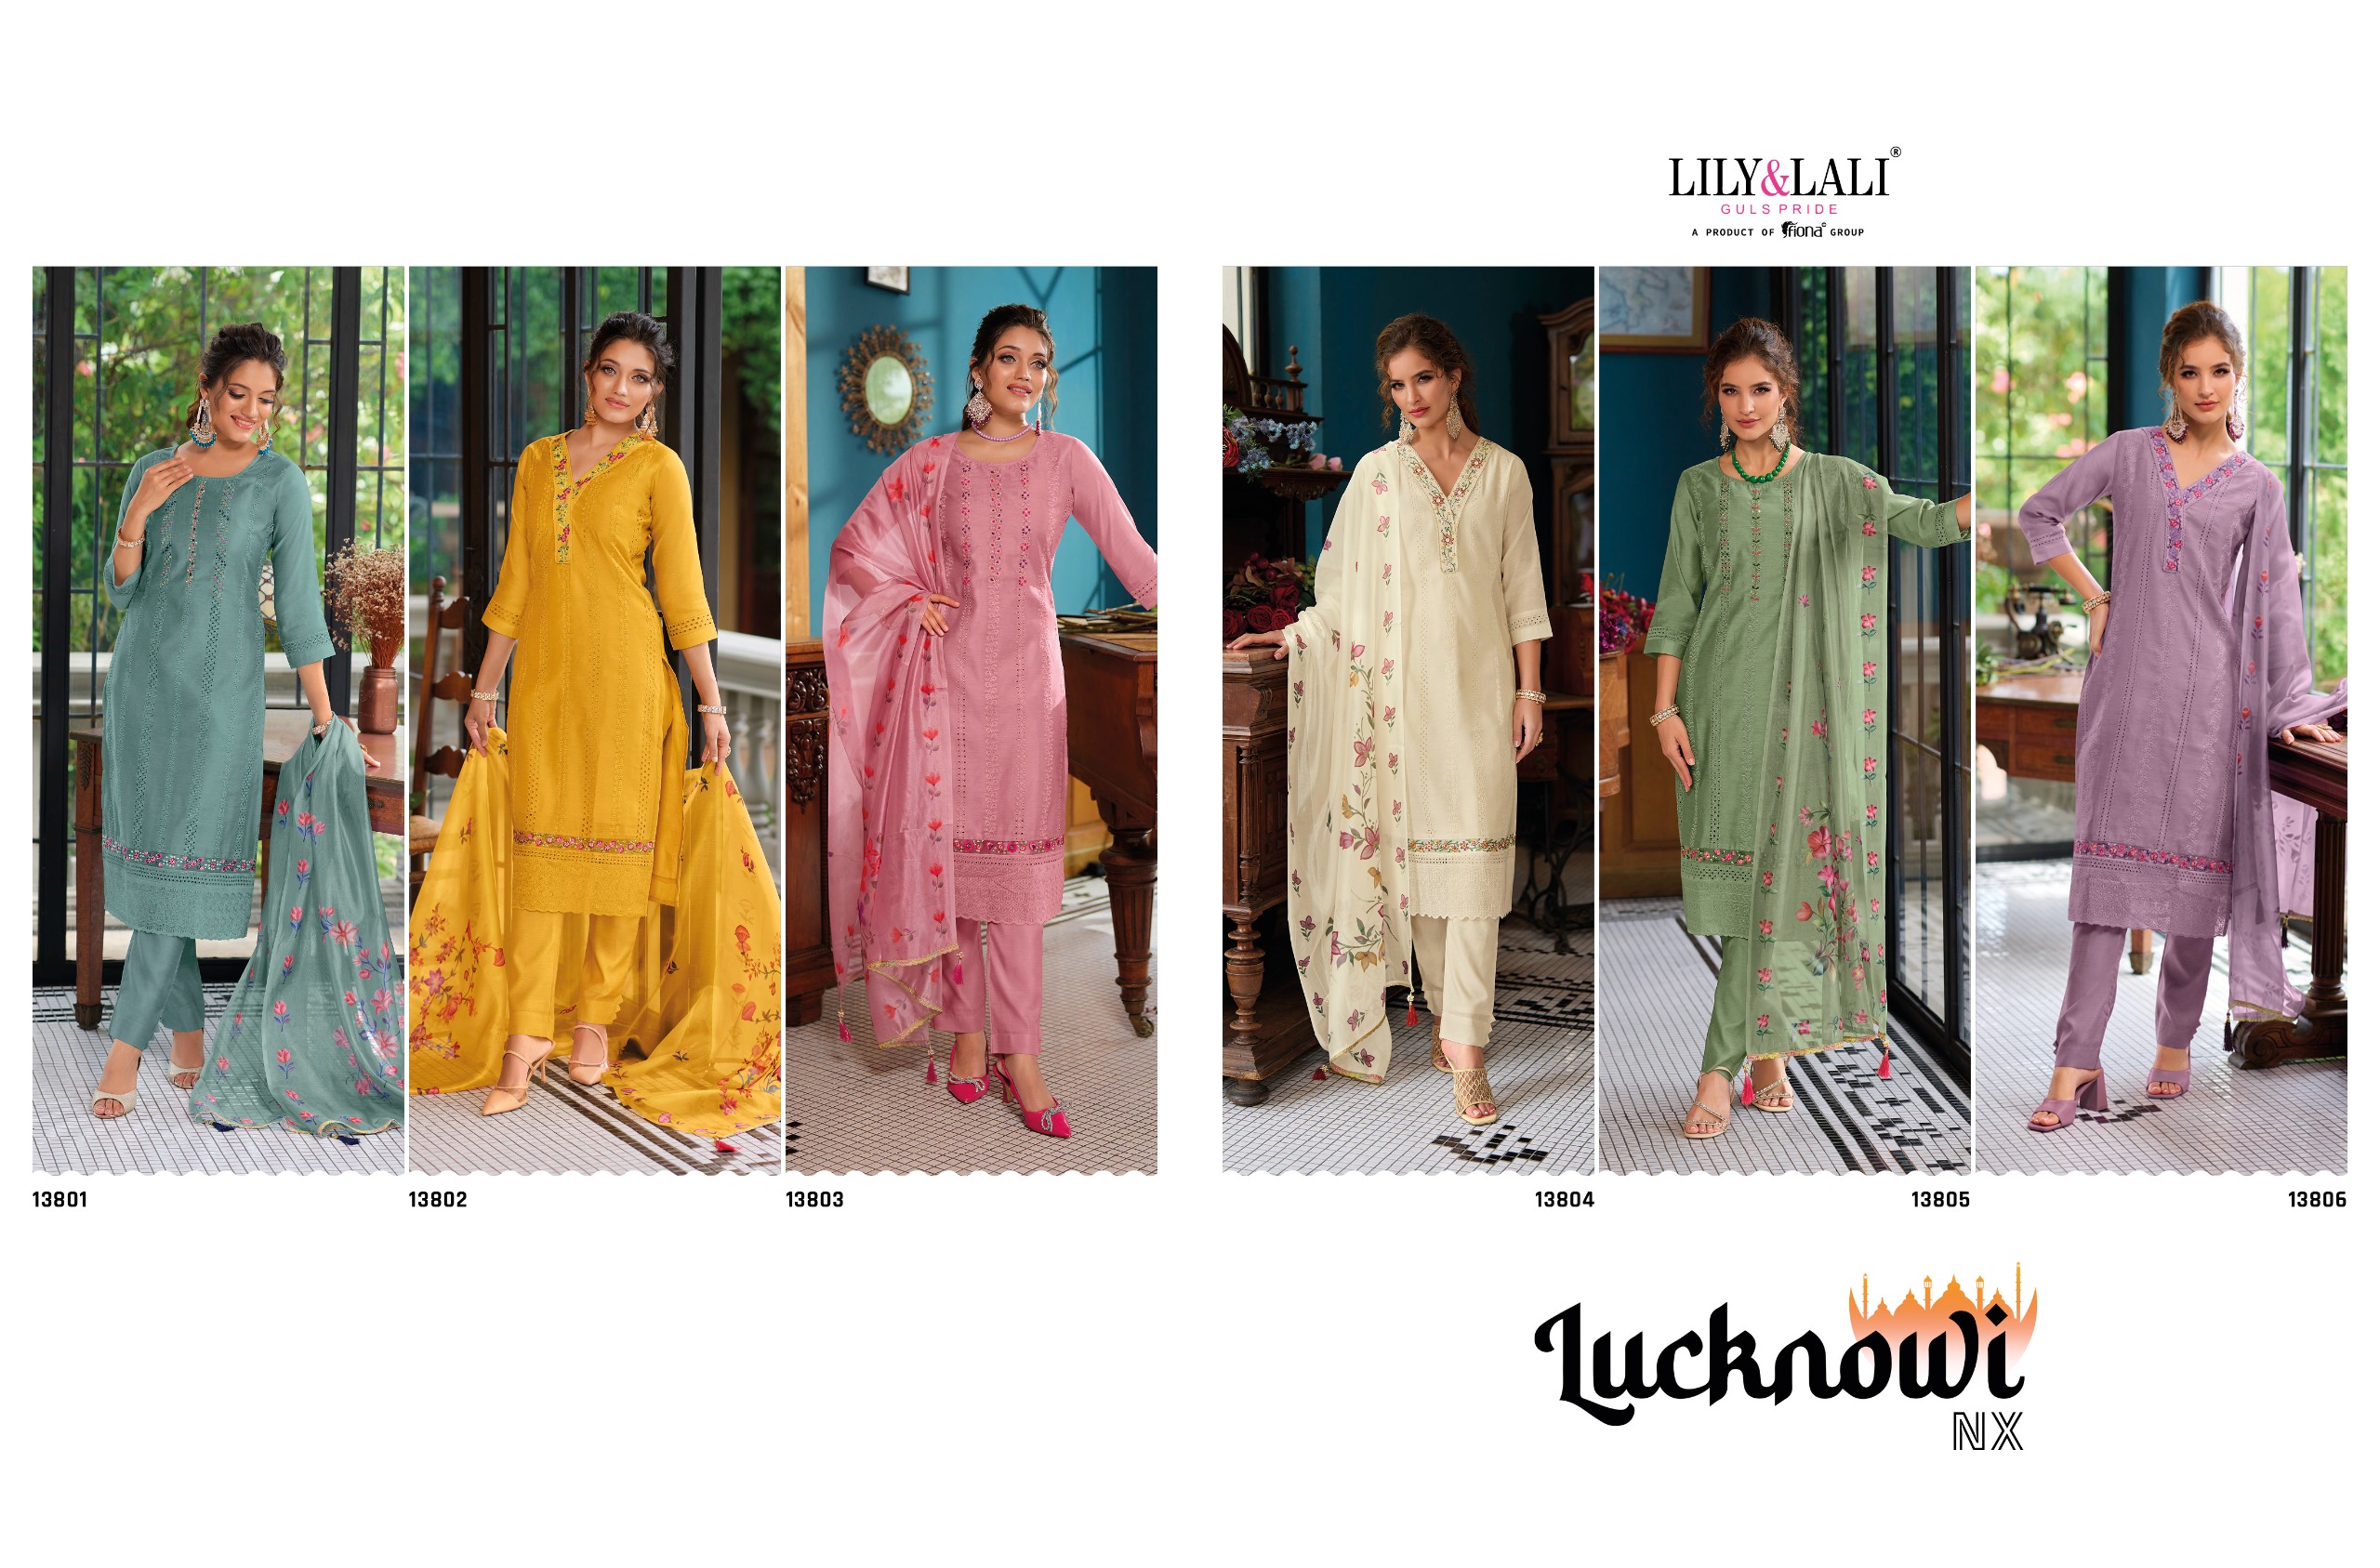 Lily And Lali Lucknowi Nx collection 7